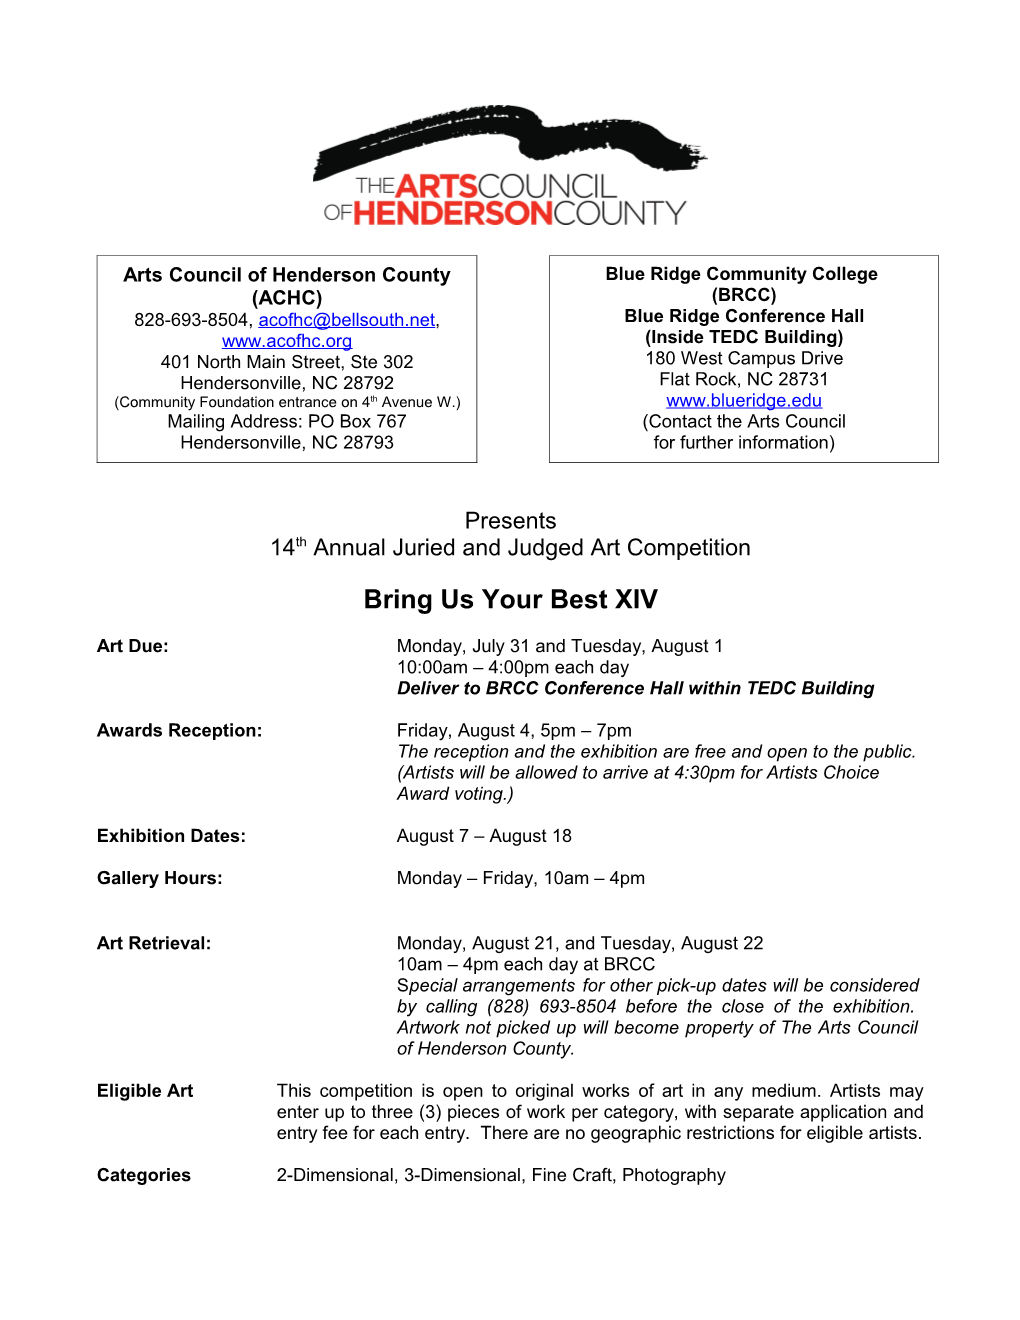 The Arts Council of Henderson County